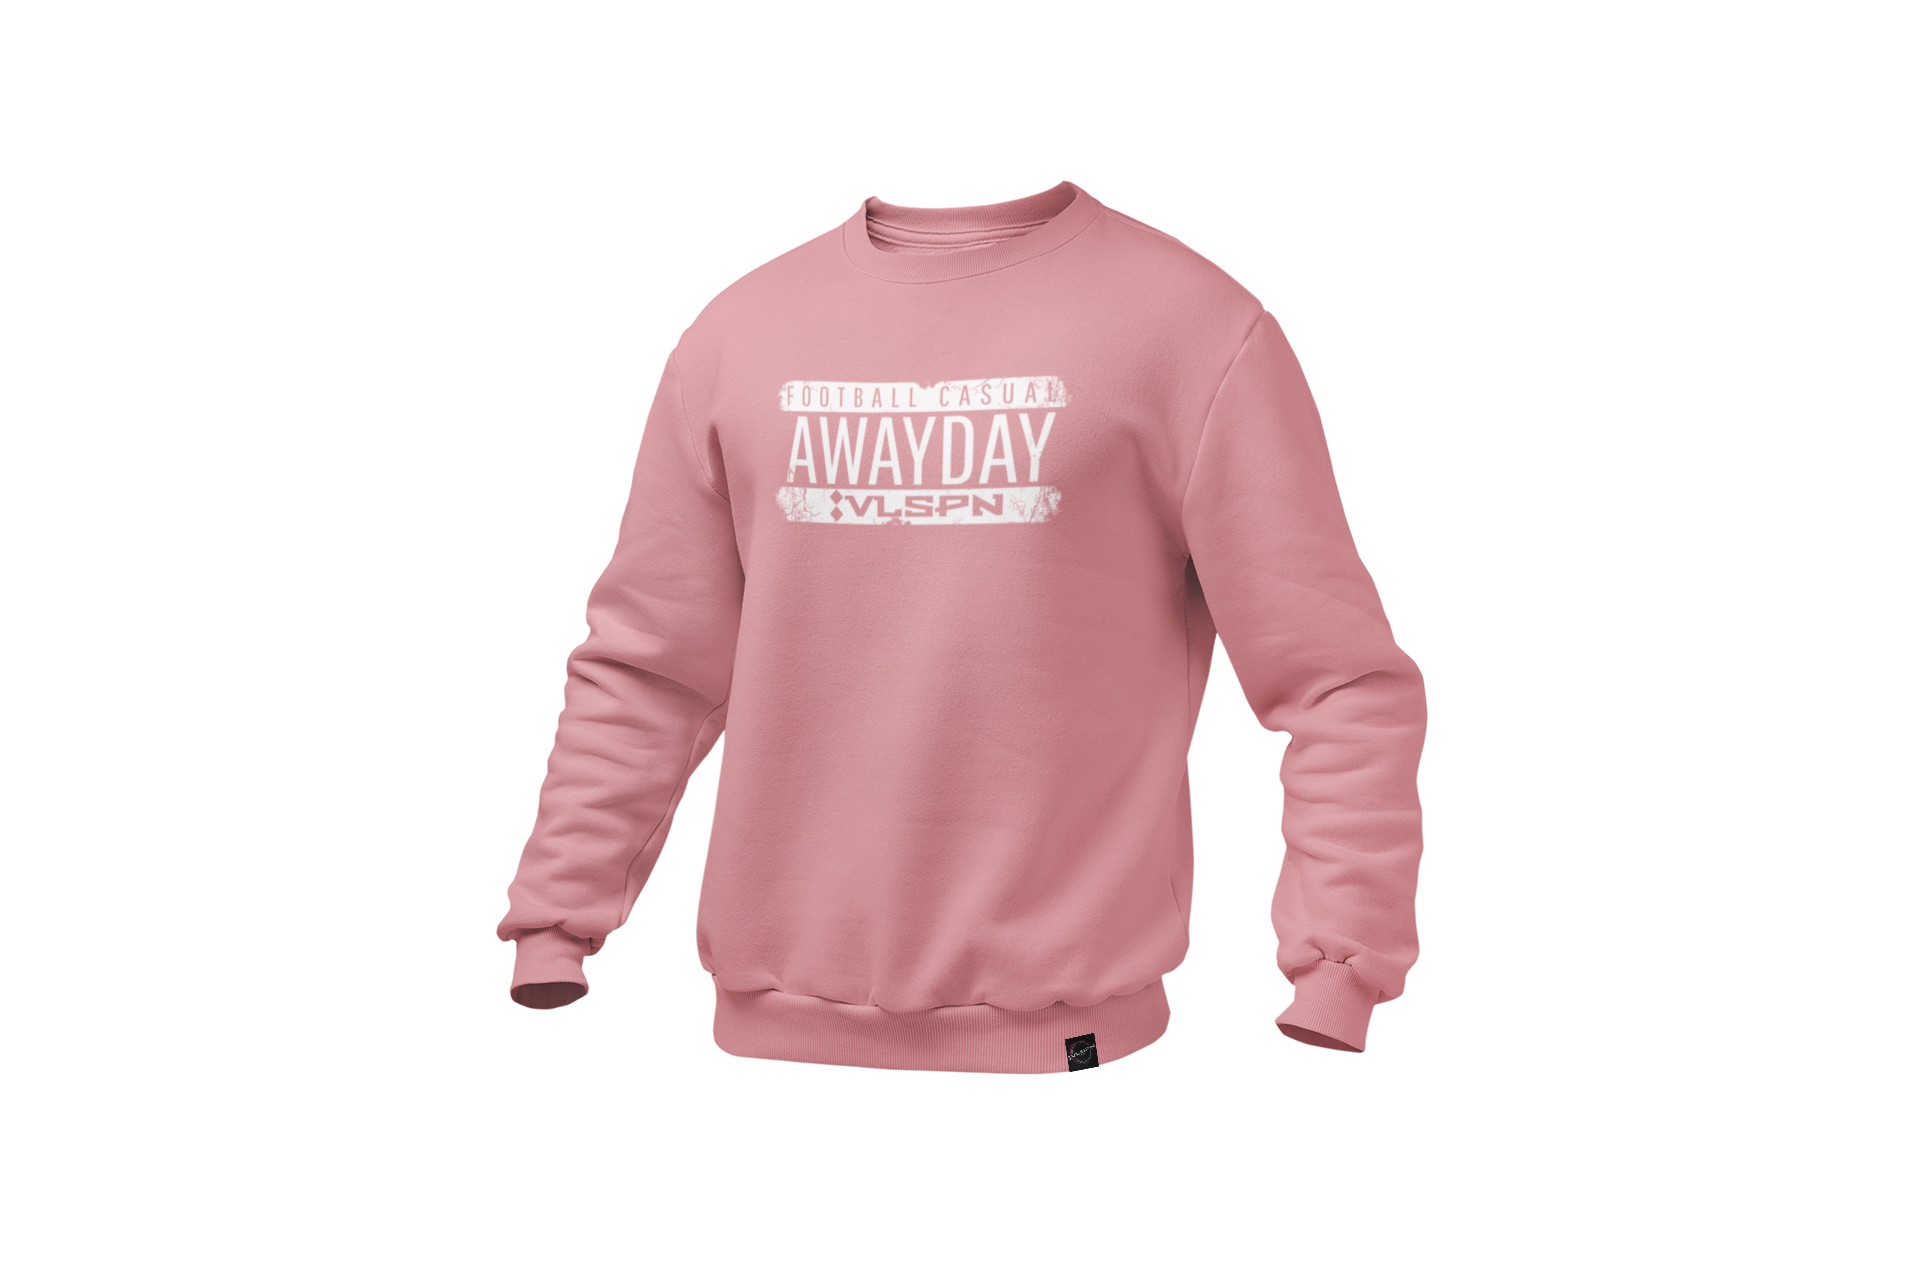 mockup-of-a-ghosted-crewneck-sweatshirt-over-a-solid-background-26960 (56).png